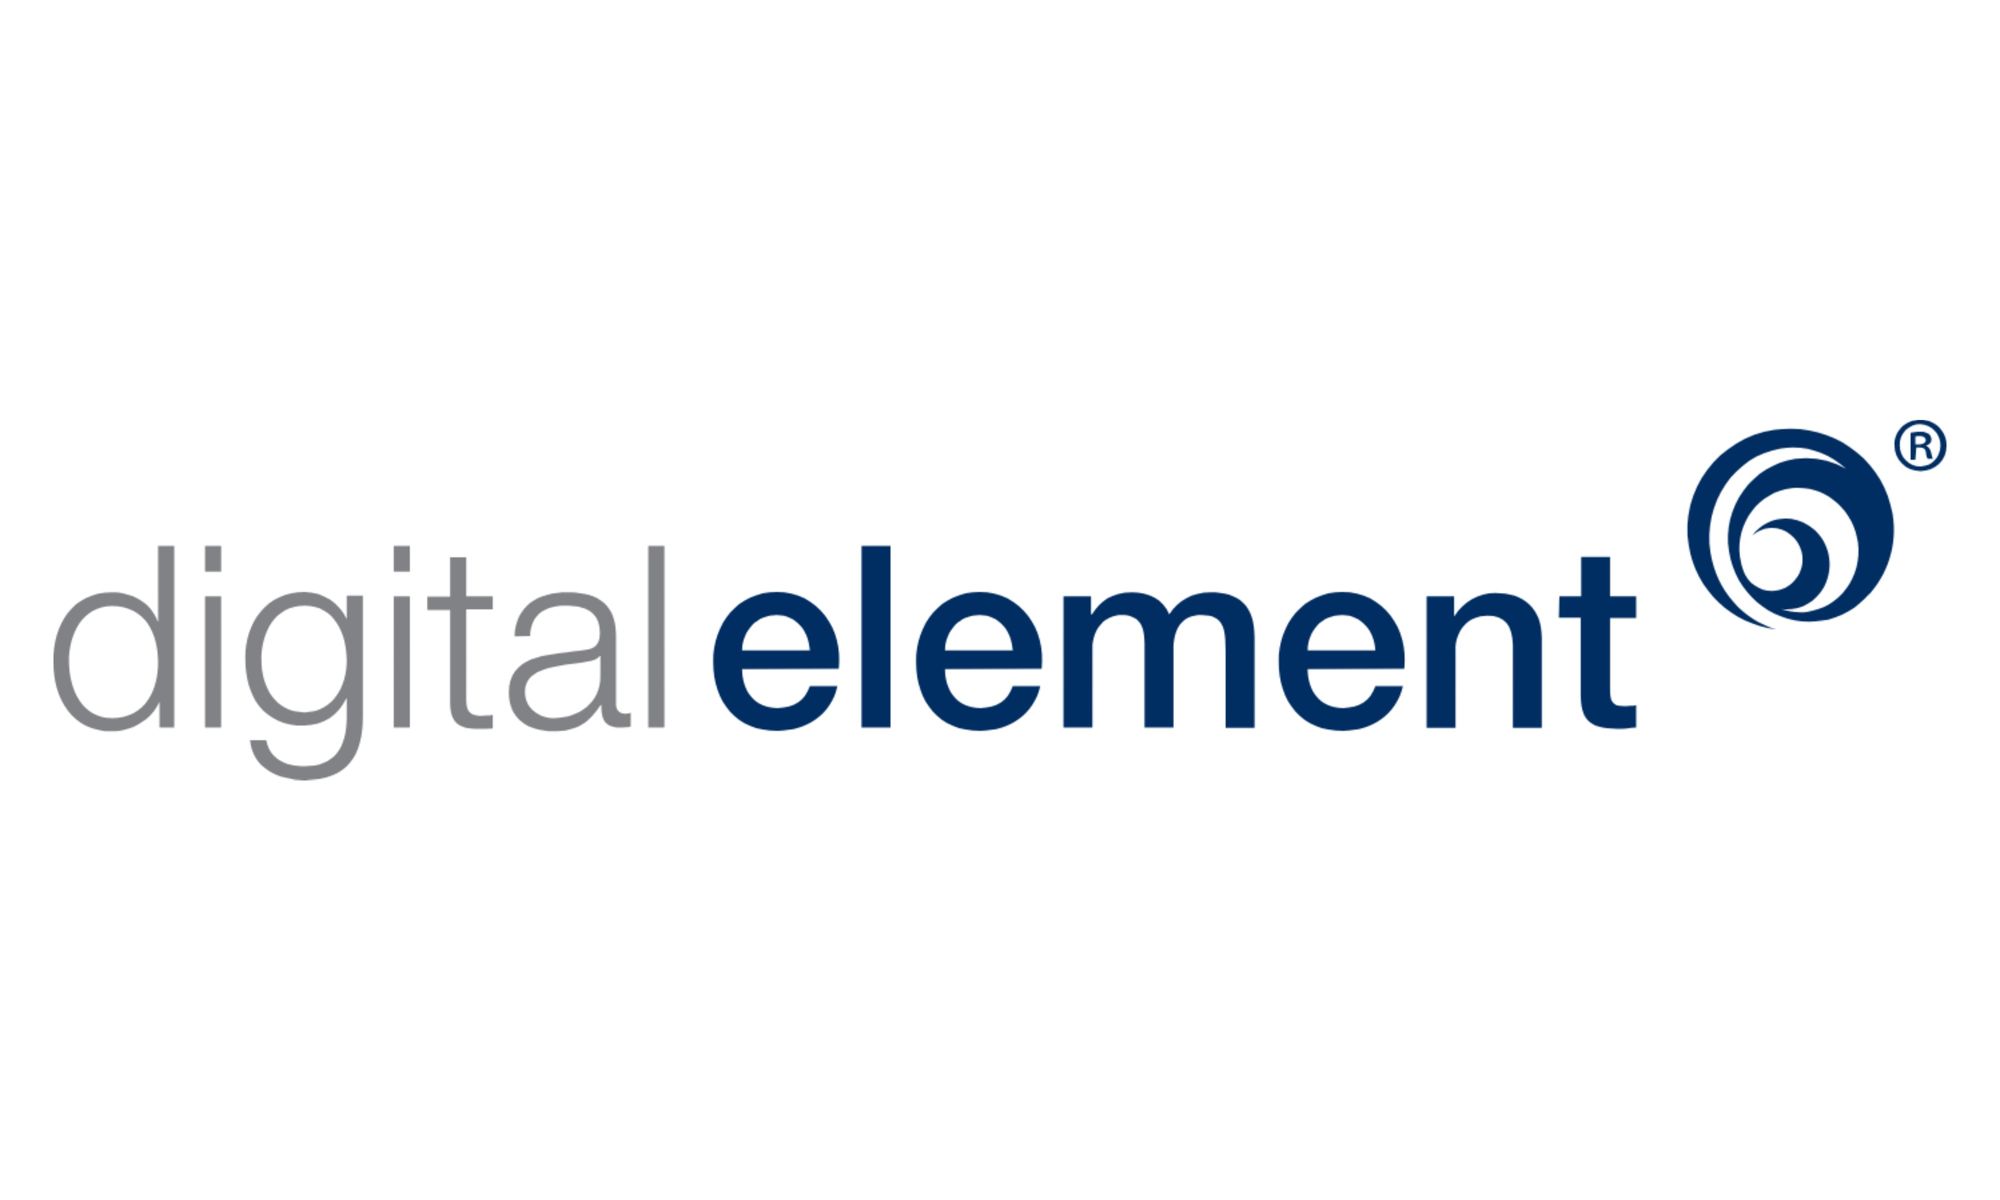 Digital Element: 20 years providing geolocation of users to advertisers